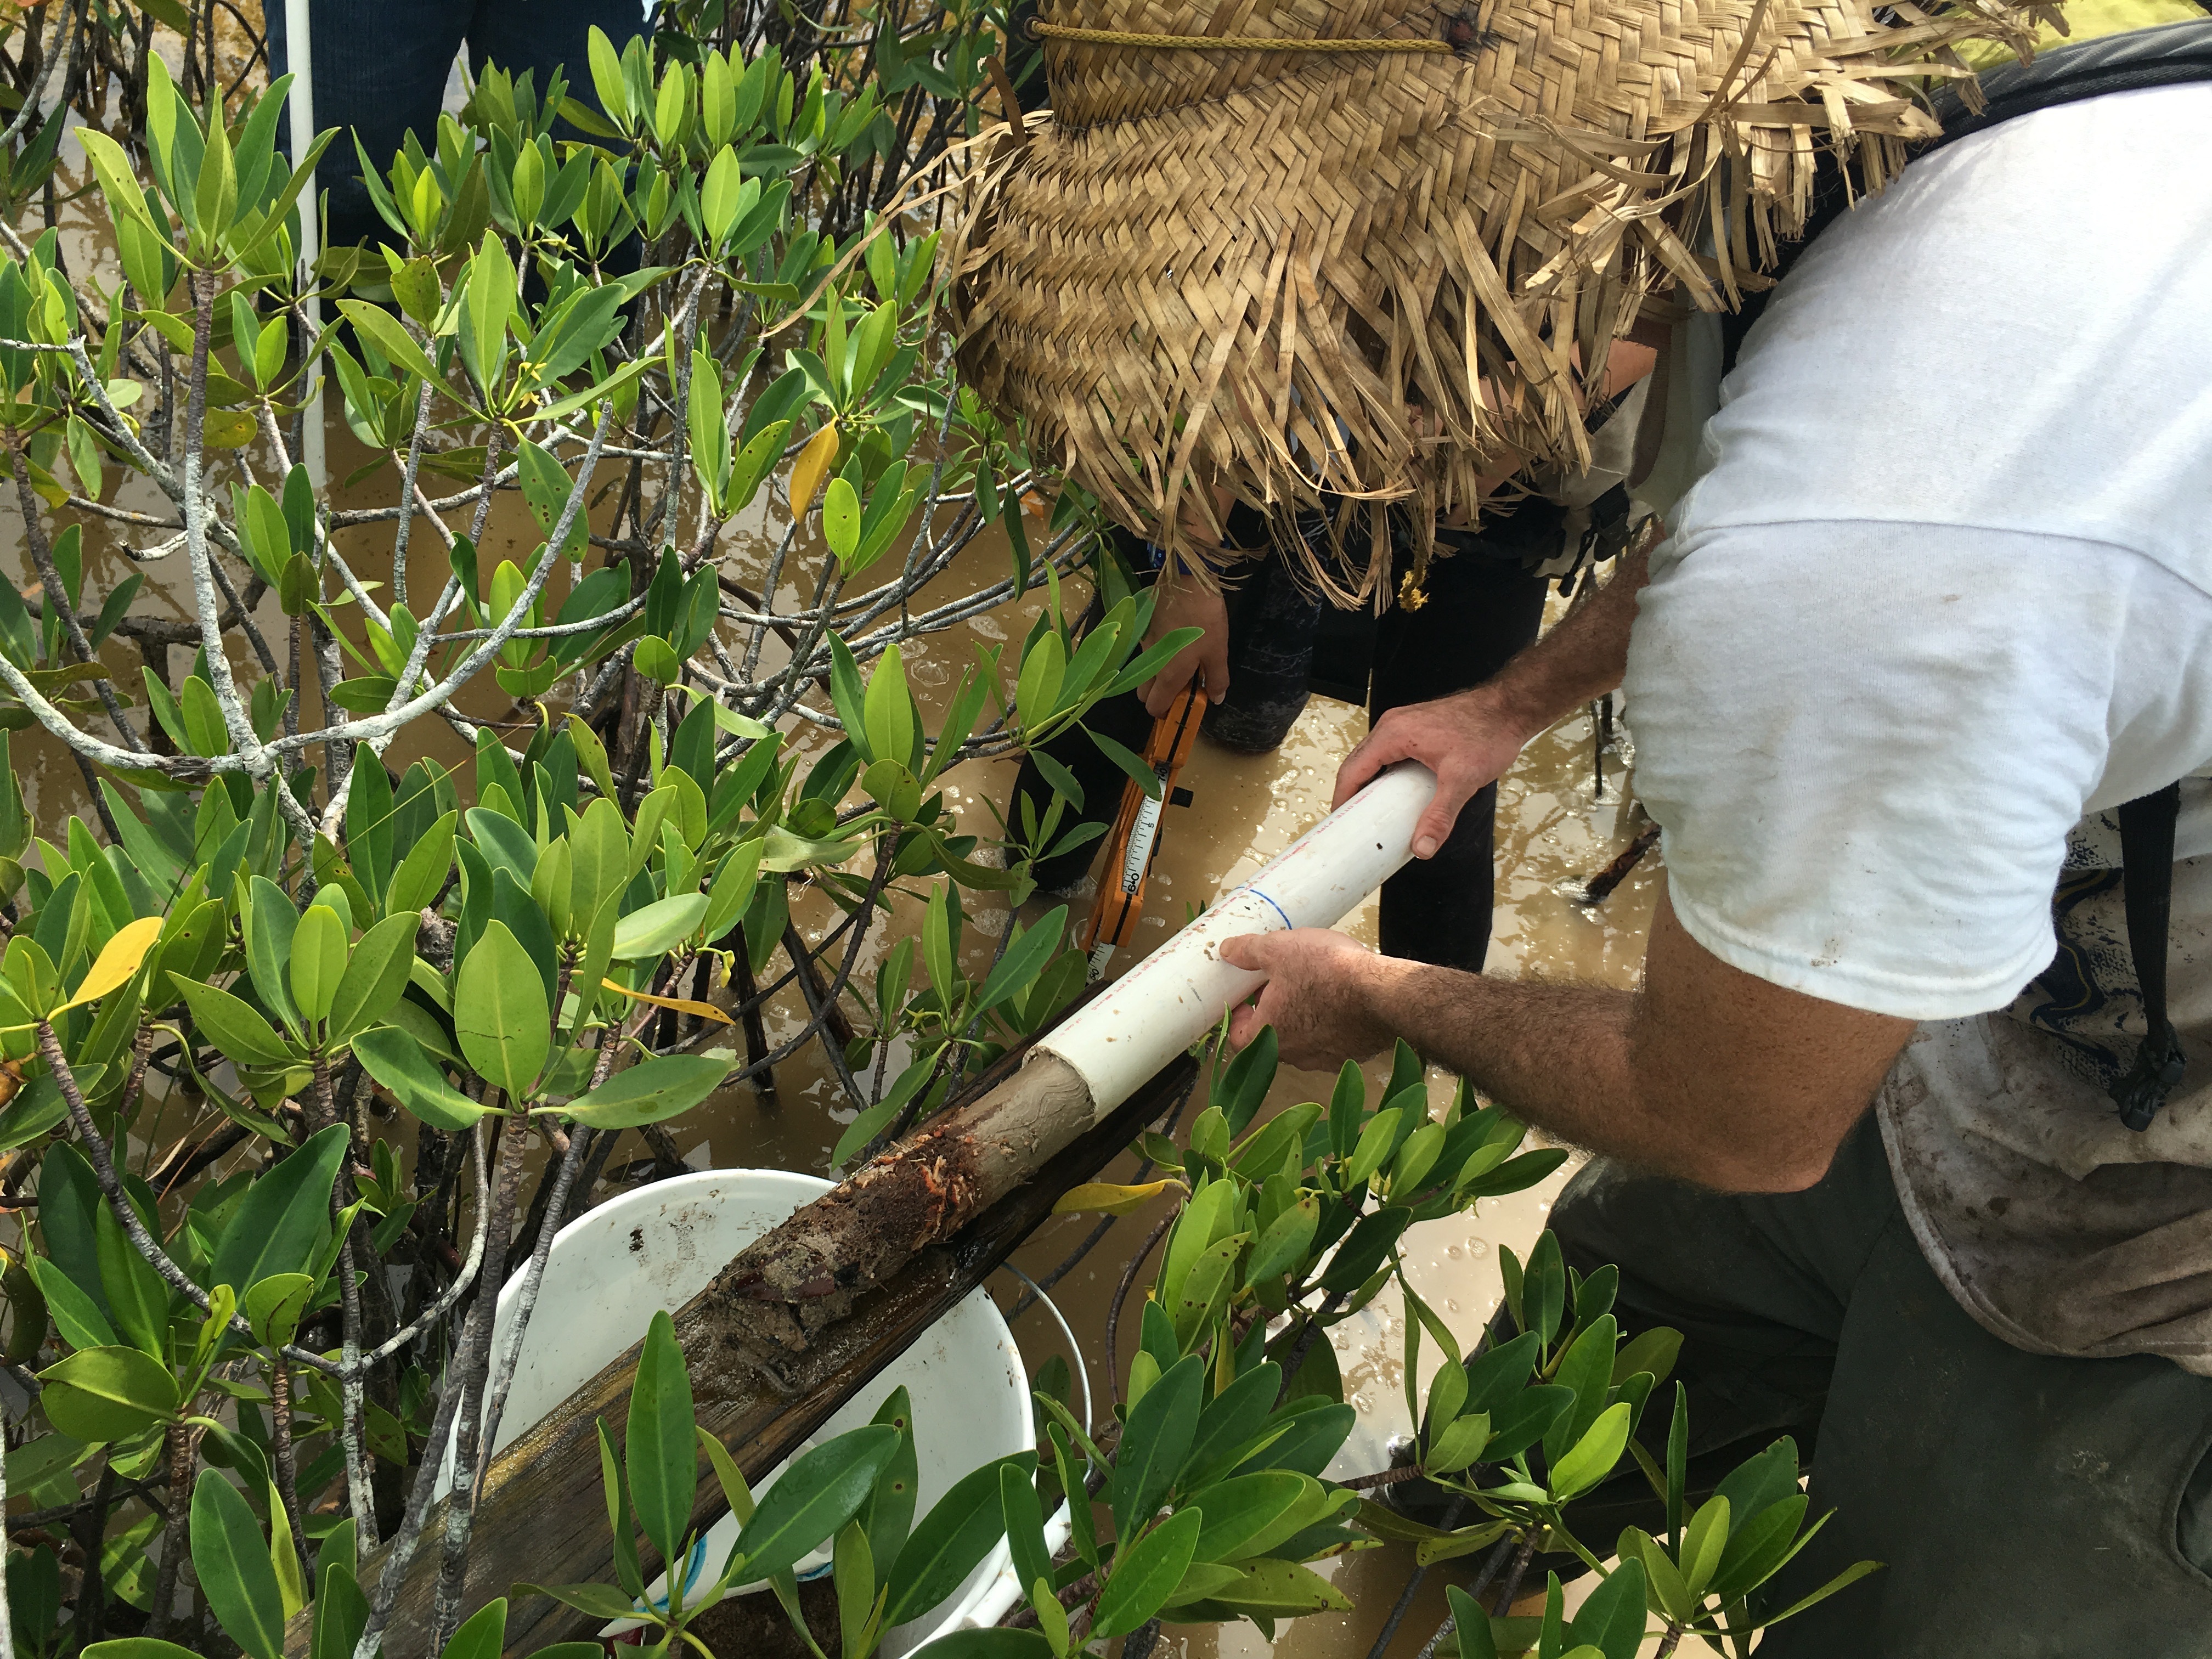 Sean Charles measuring a soil core in dwarf mangroves in Biscayne National Park.